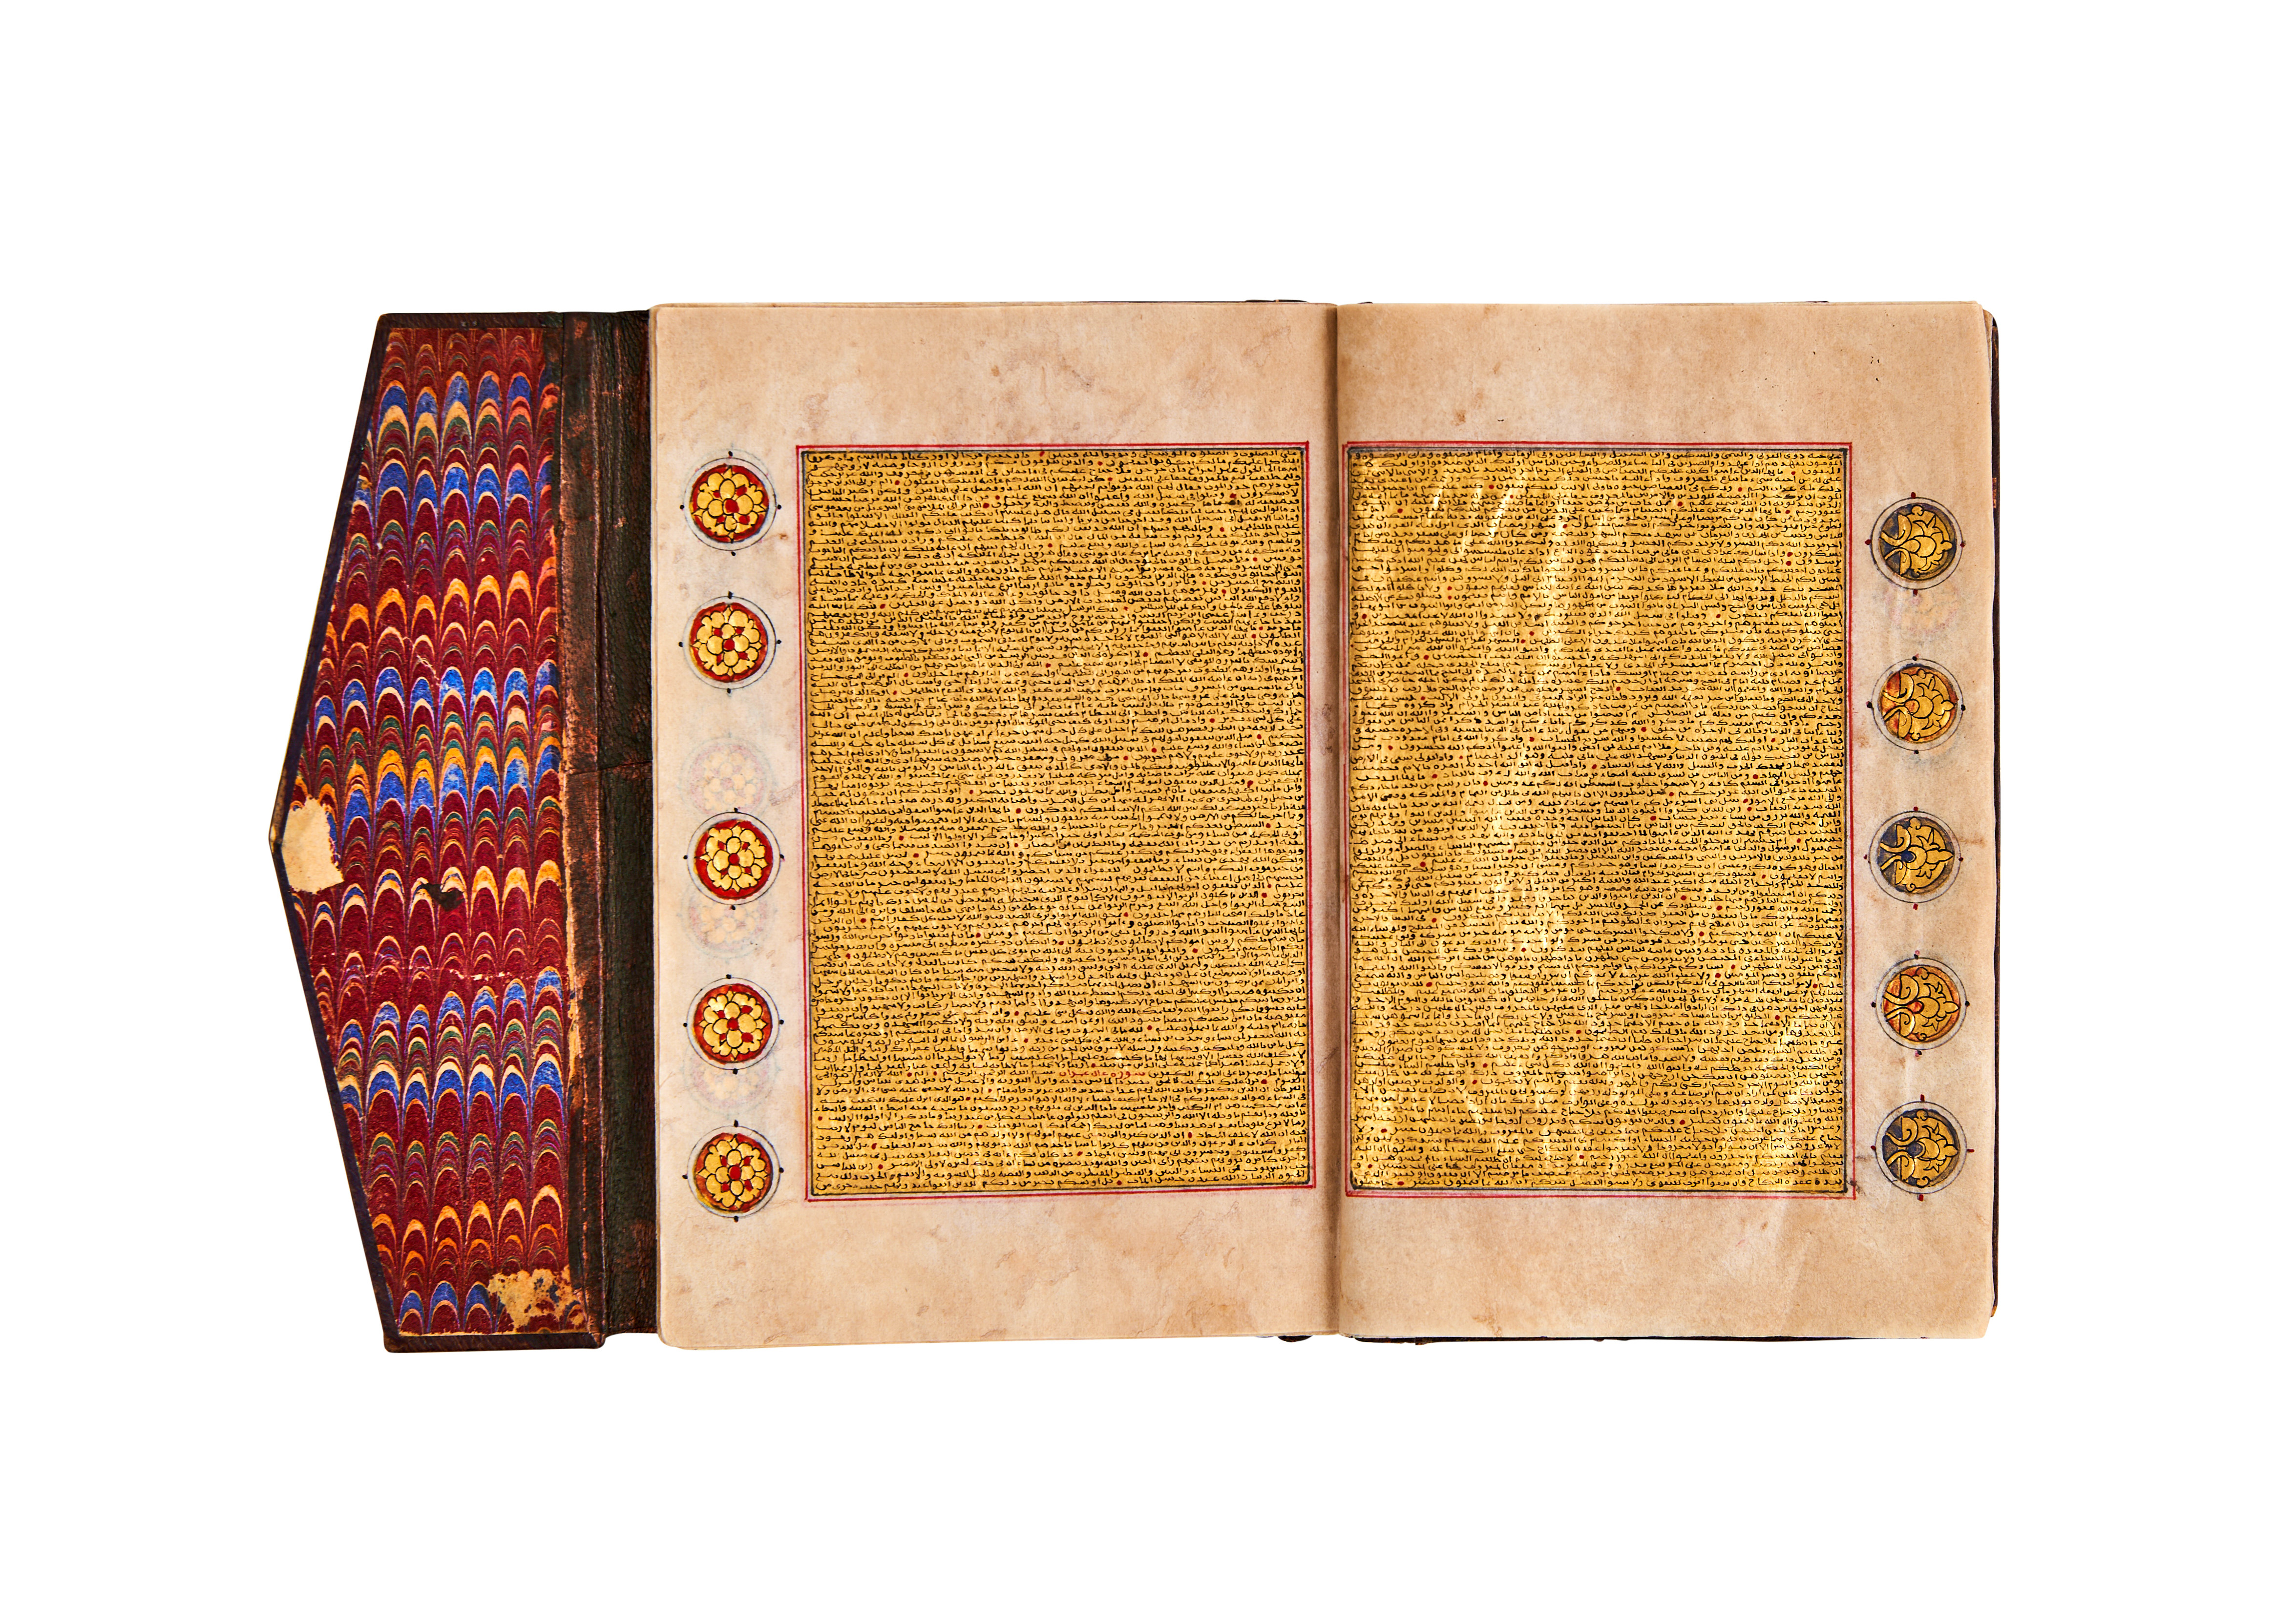 A COMPLETE GOLD MINIATURE QURAN, FOR HIS EXCELLENCE ABU ABDALLAH YUSEF, DATED 1288AH, COPIED BY FAT - Image 4 of 9